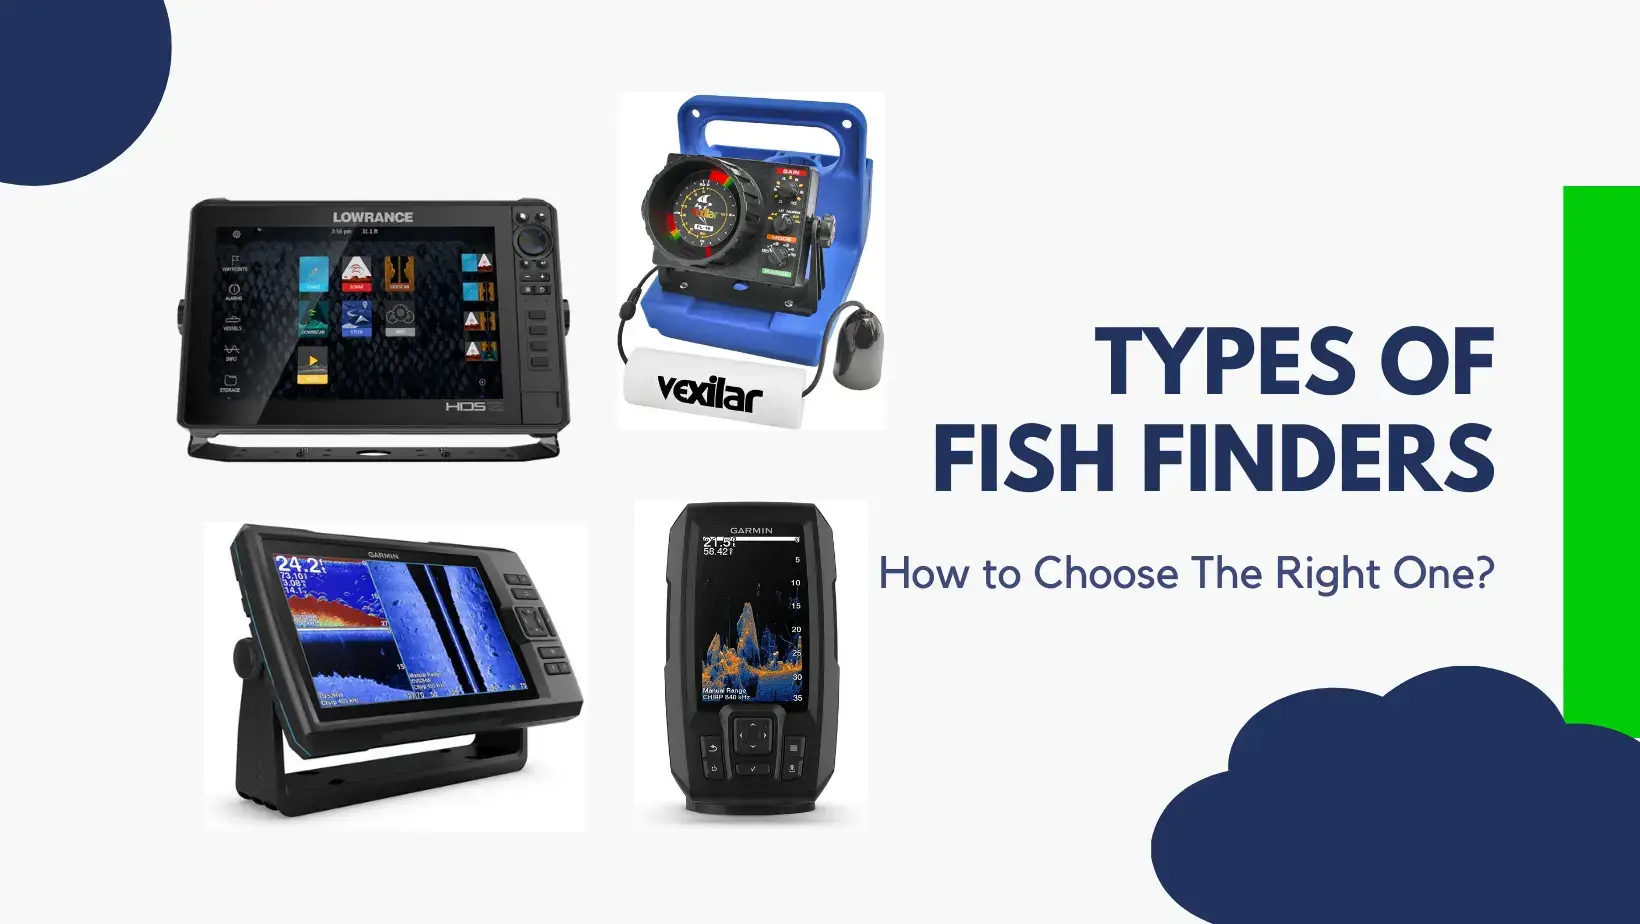 Types of Fish Finders